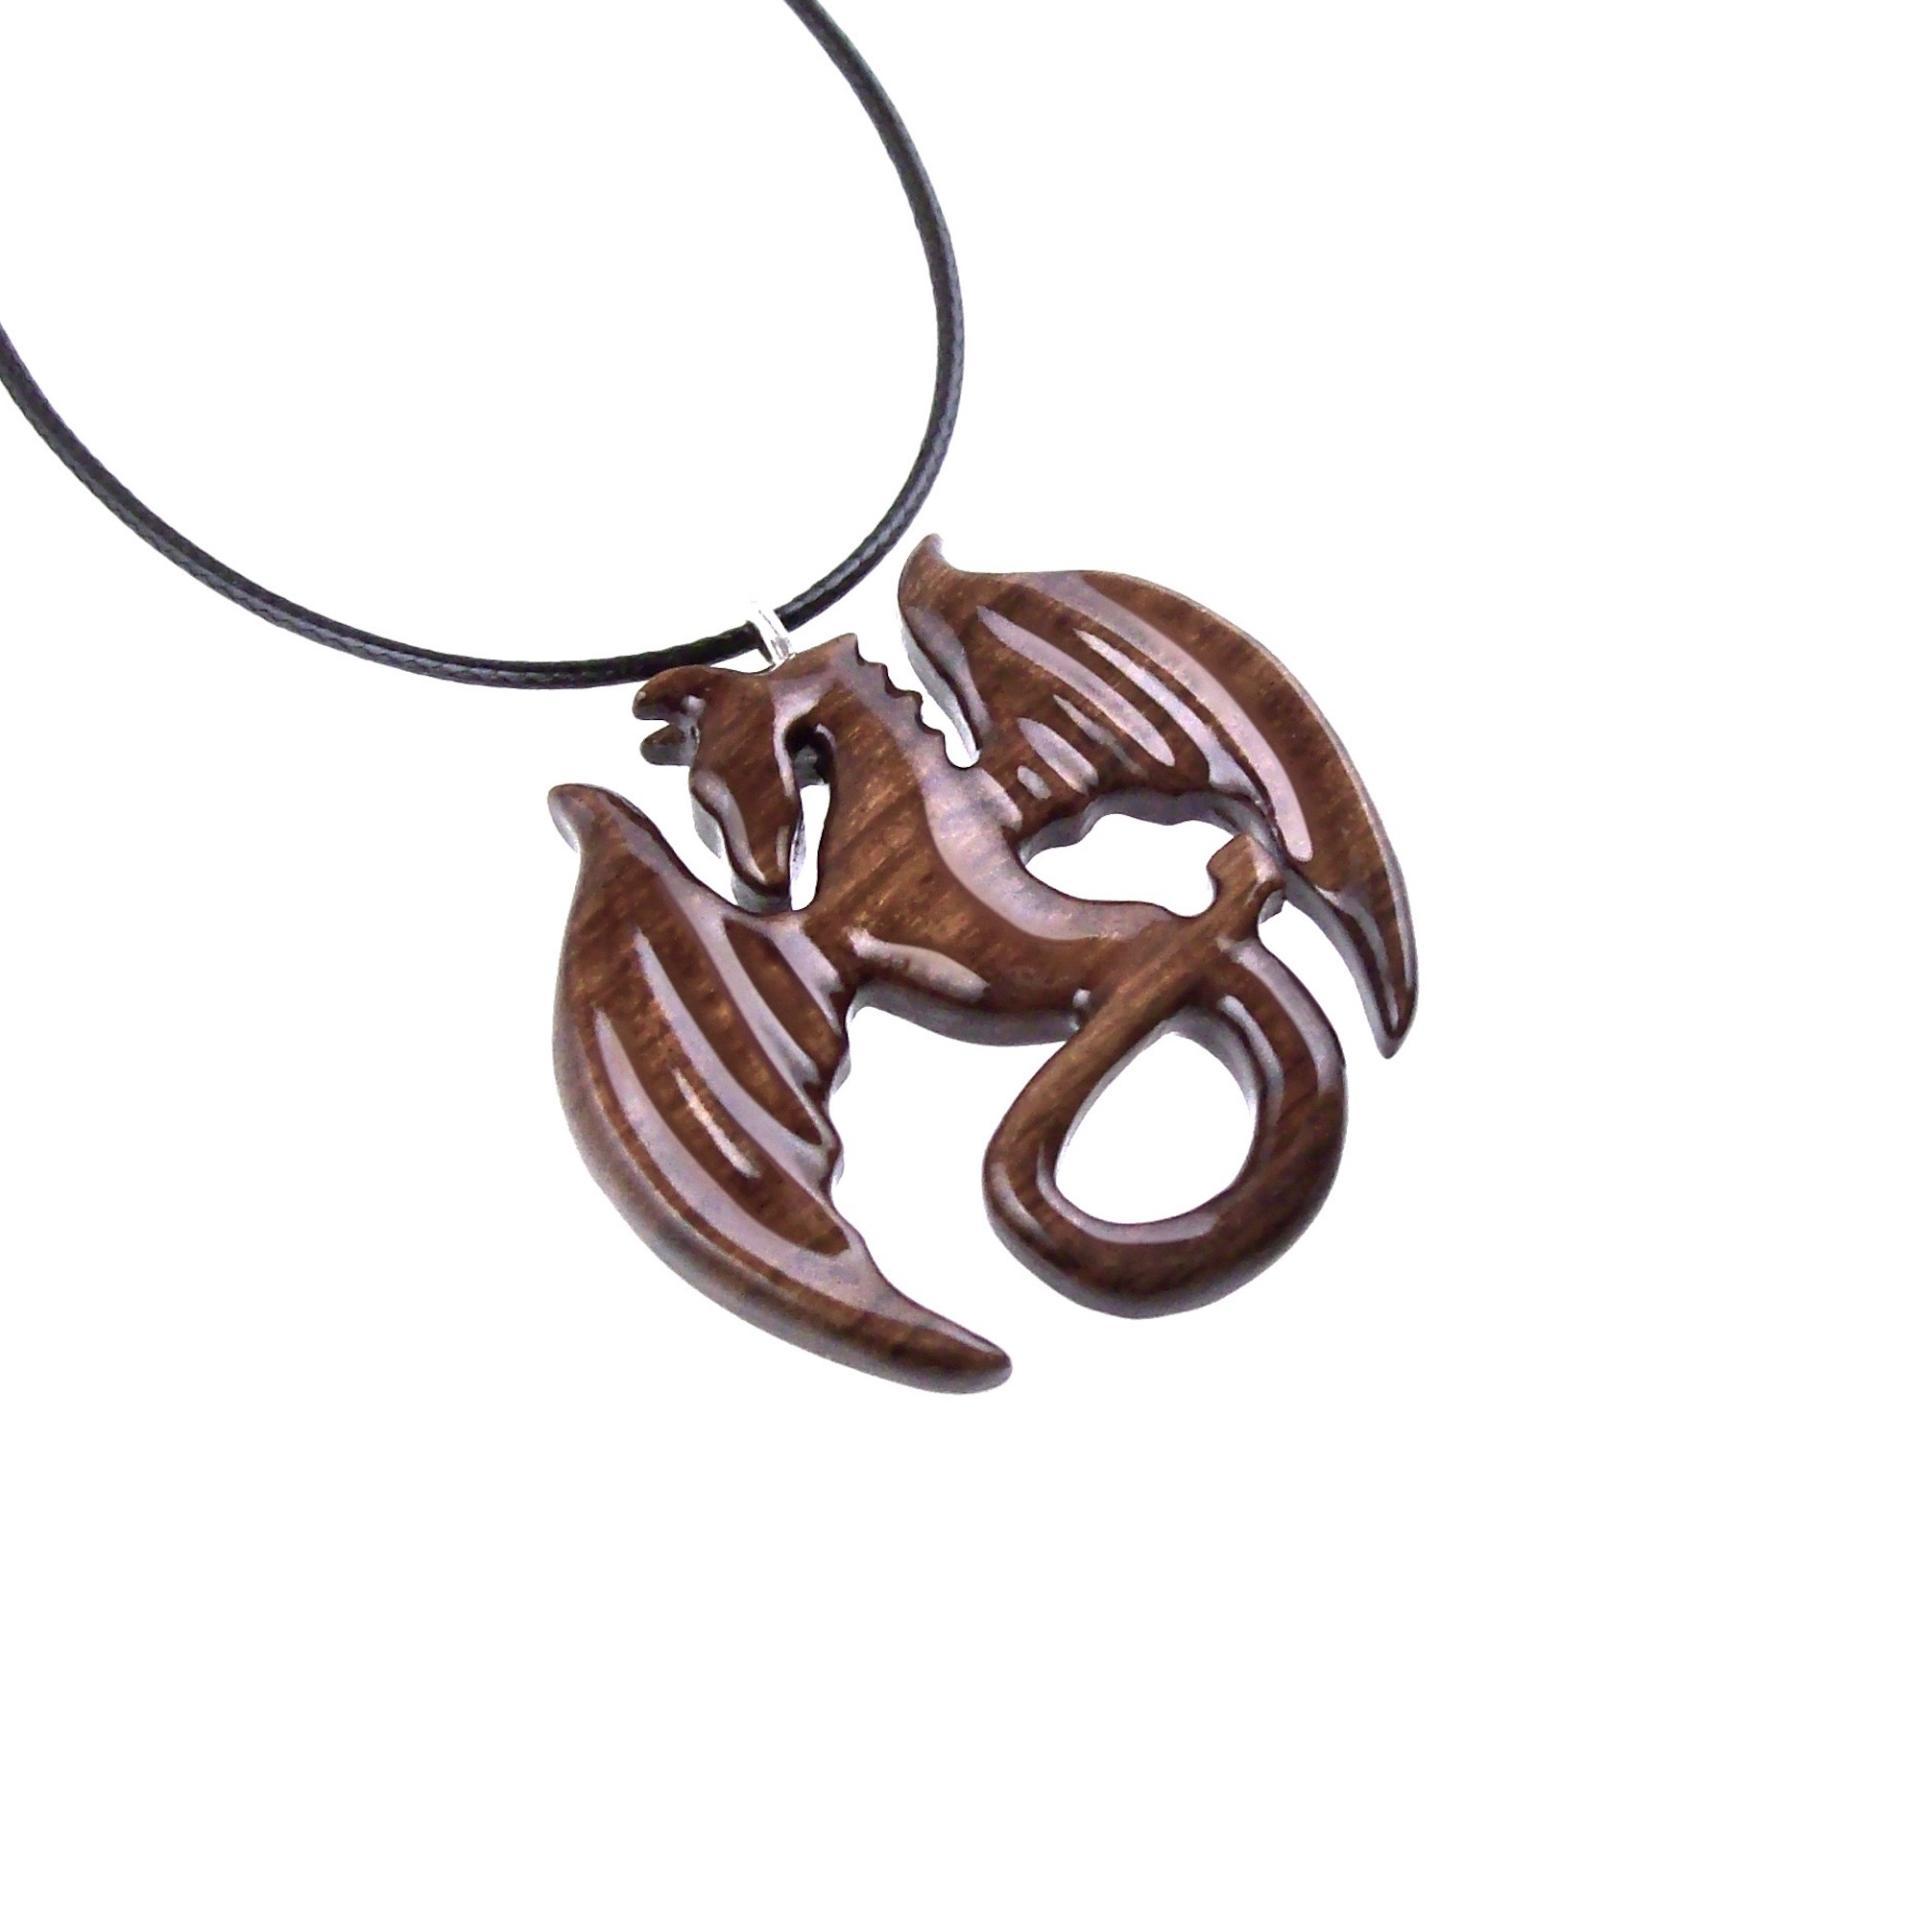 Dragon Pendant, Hand Carved Wooden Dragon Necklace, One of a Kind Handmade Wood Jewelry Gift for Men Women